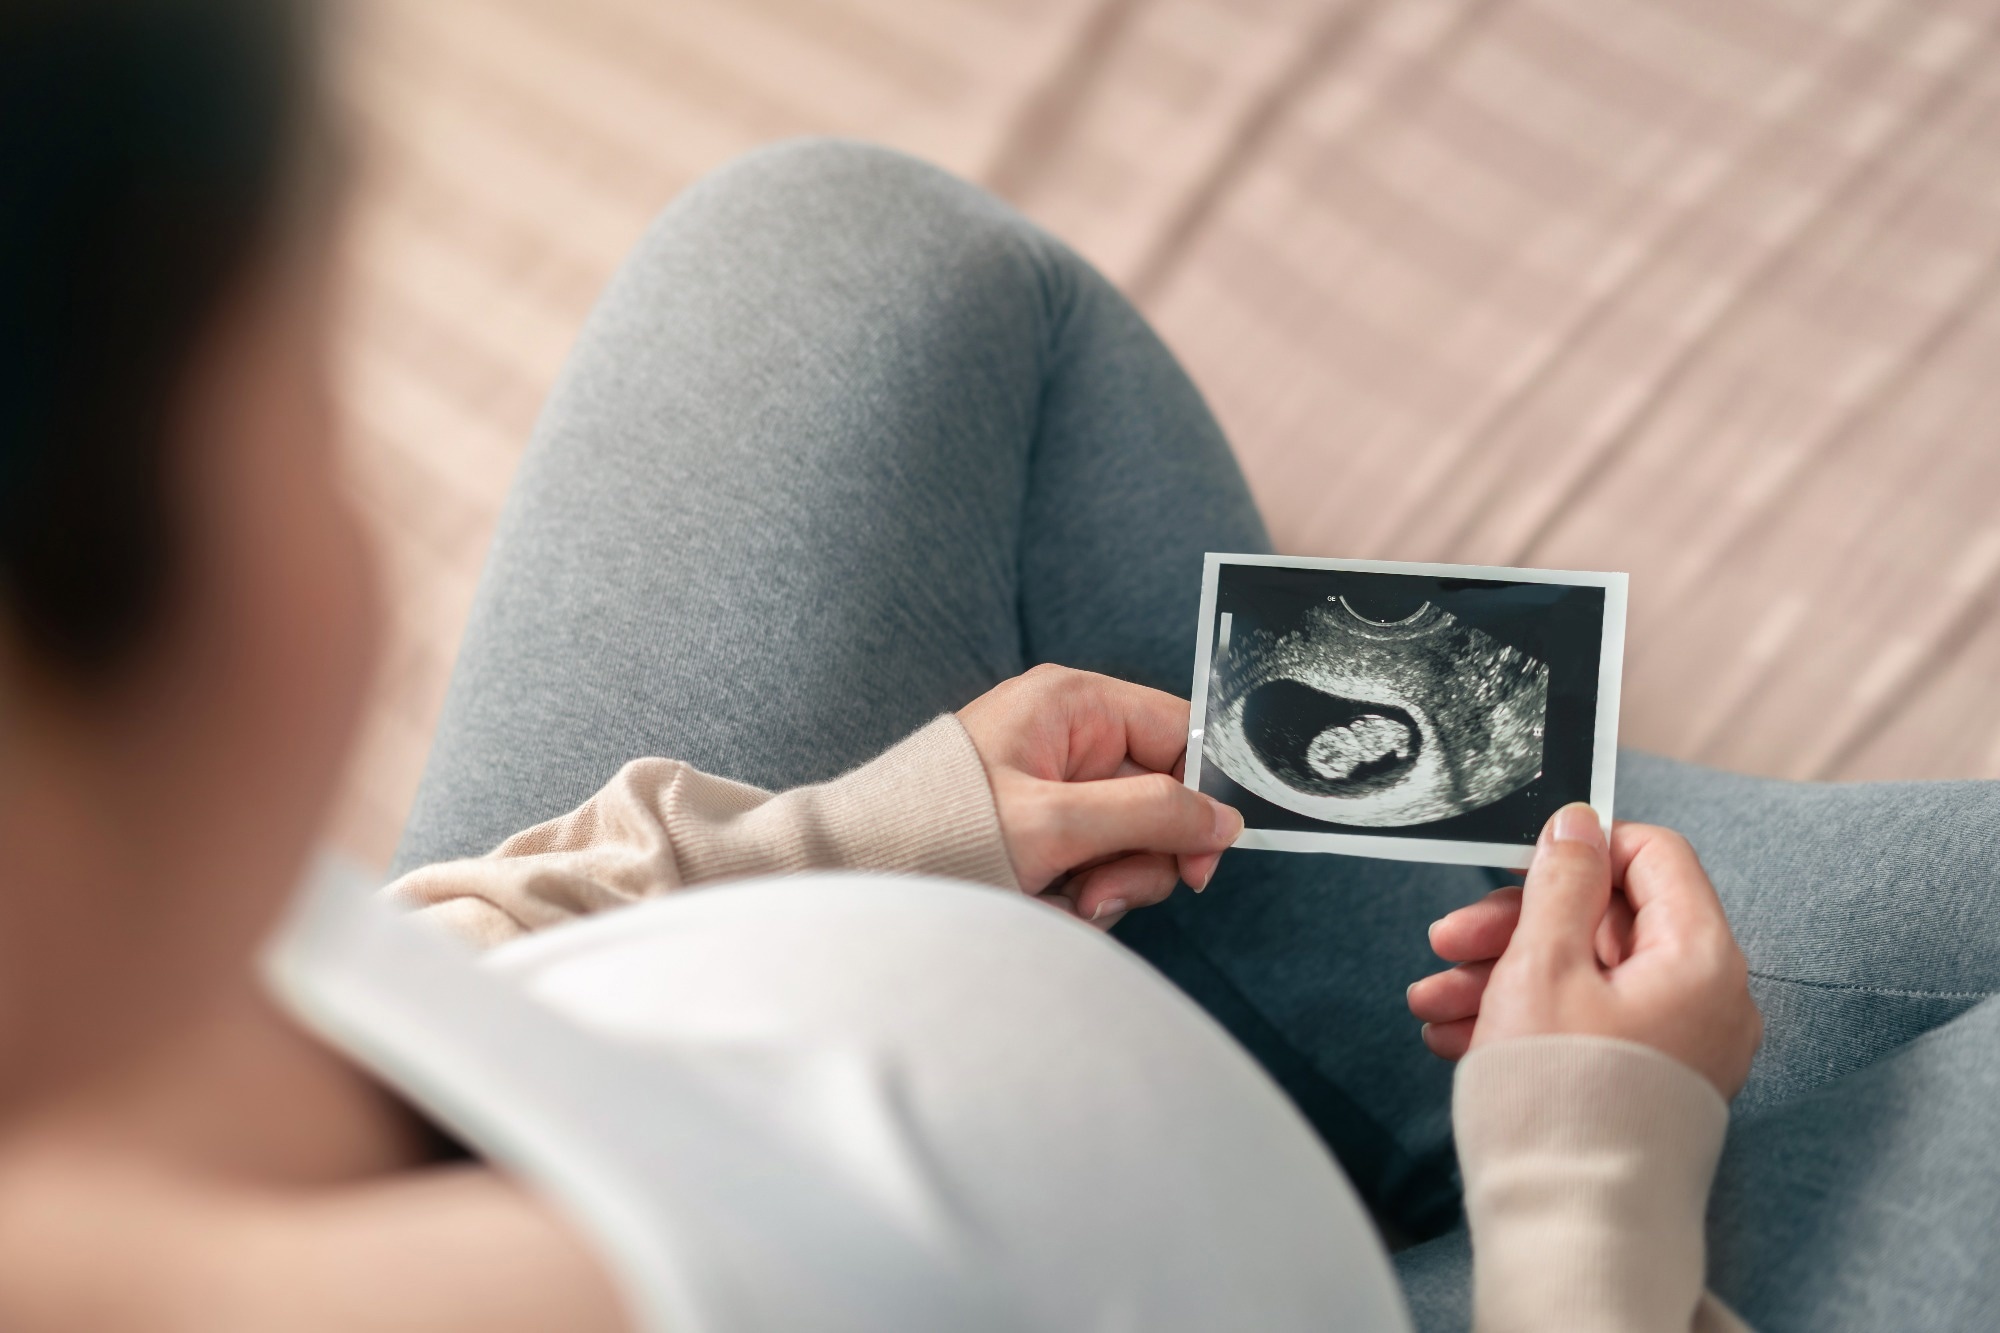 Study: Prenatal environmental exposures associated with sex differences in childhood obesity and neurodevelopment. Image Credit: Chanintorn.v / Shutterstock